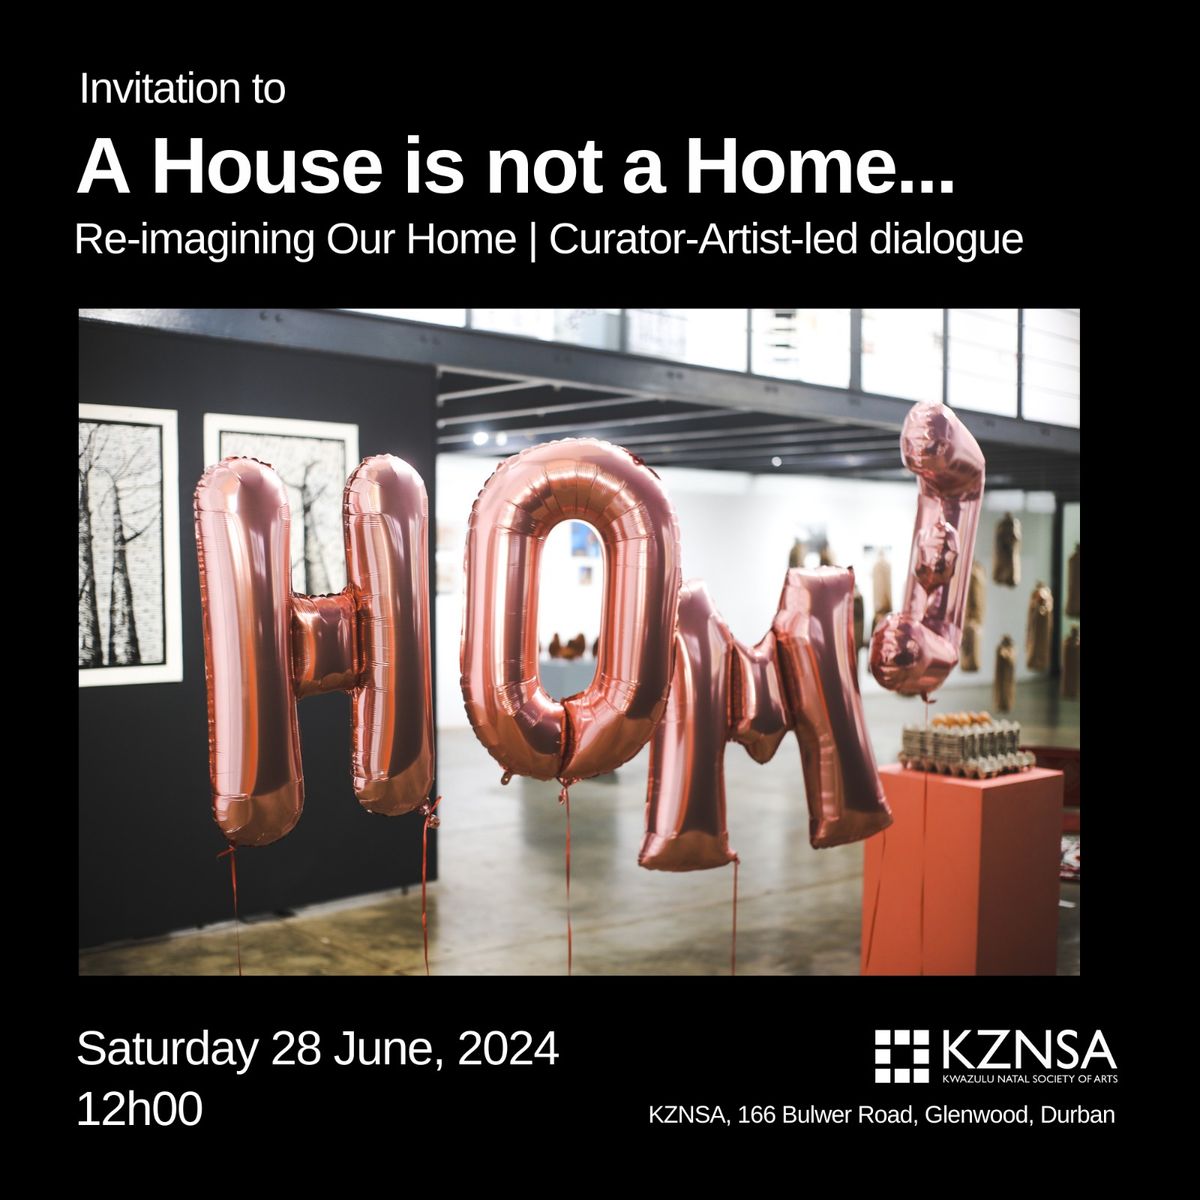 Re-imagining Our Home | Curator-Artist-led dialogue